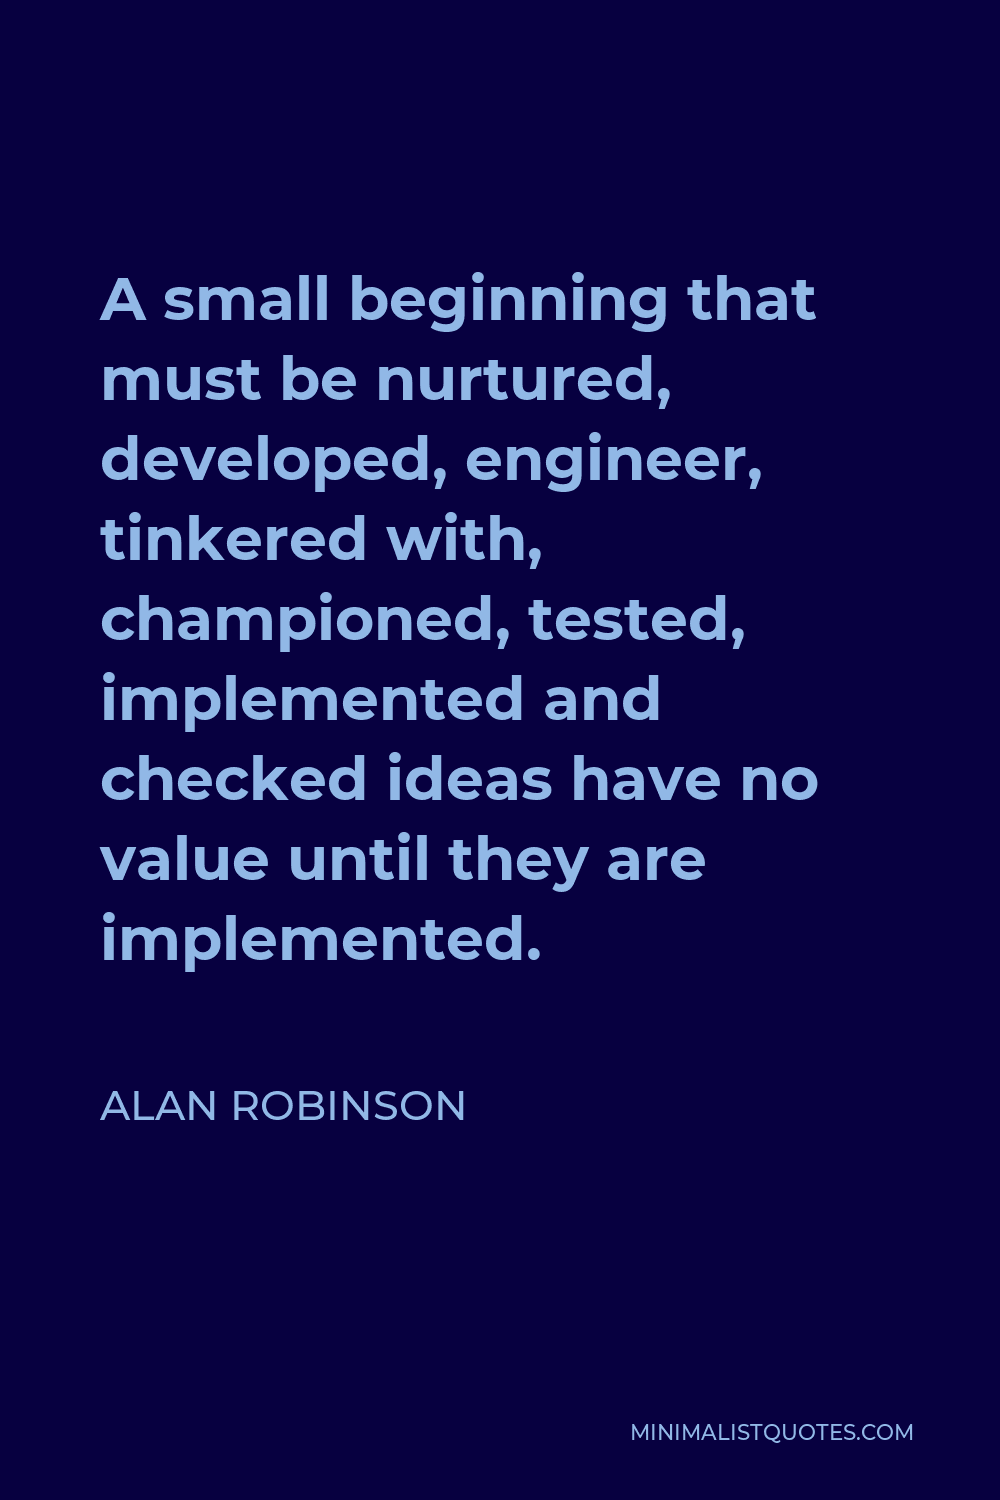 Alan Robinson Quote - A small beginning that must be nurtured, developed, engineer, tinkered with, championed, tested, implemented and checked ideas have no value until they are implemented.